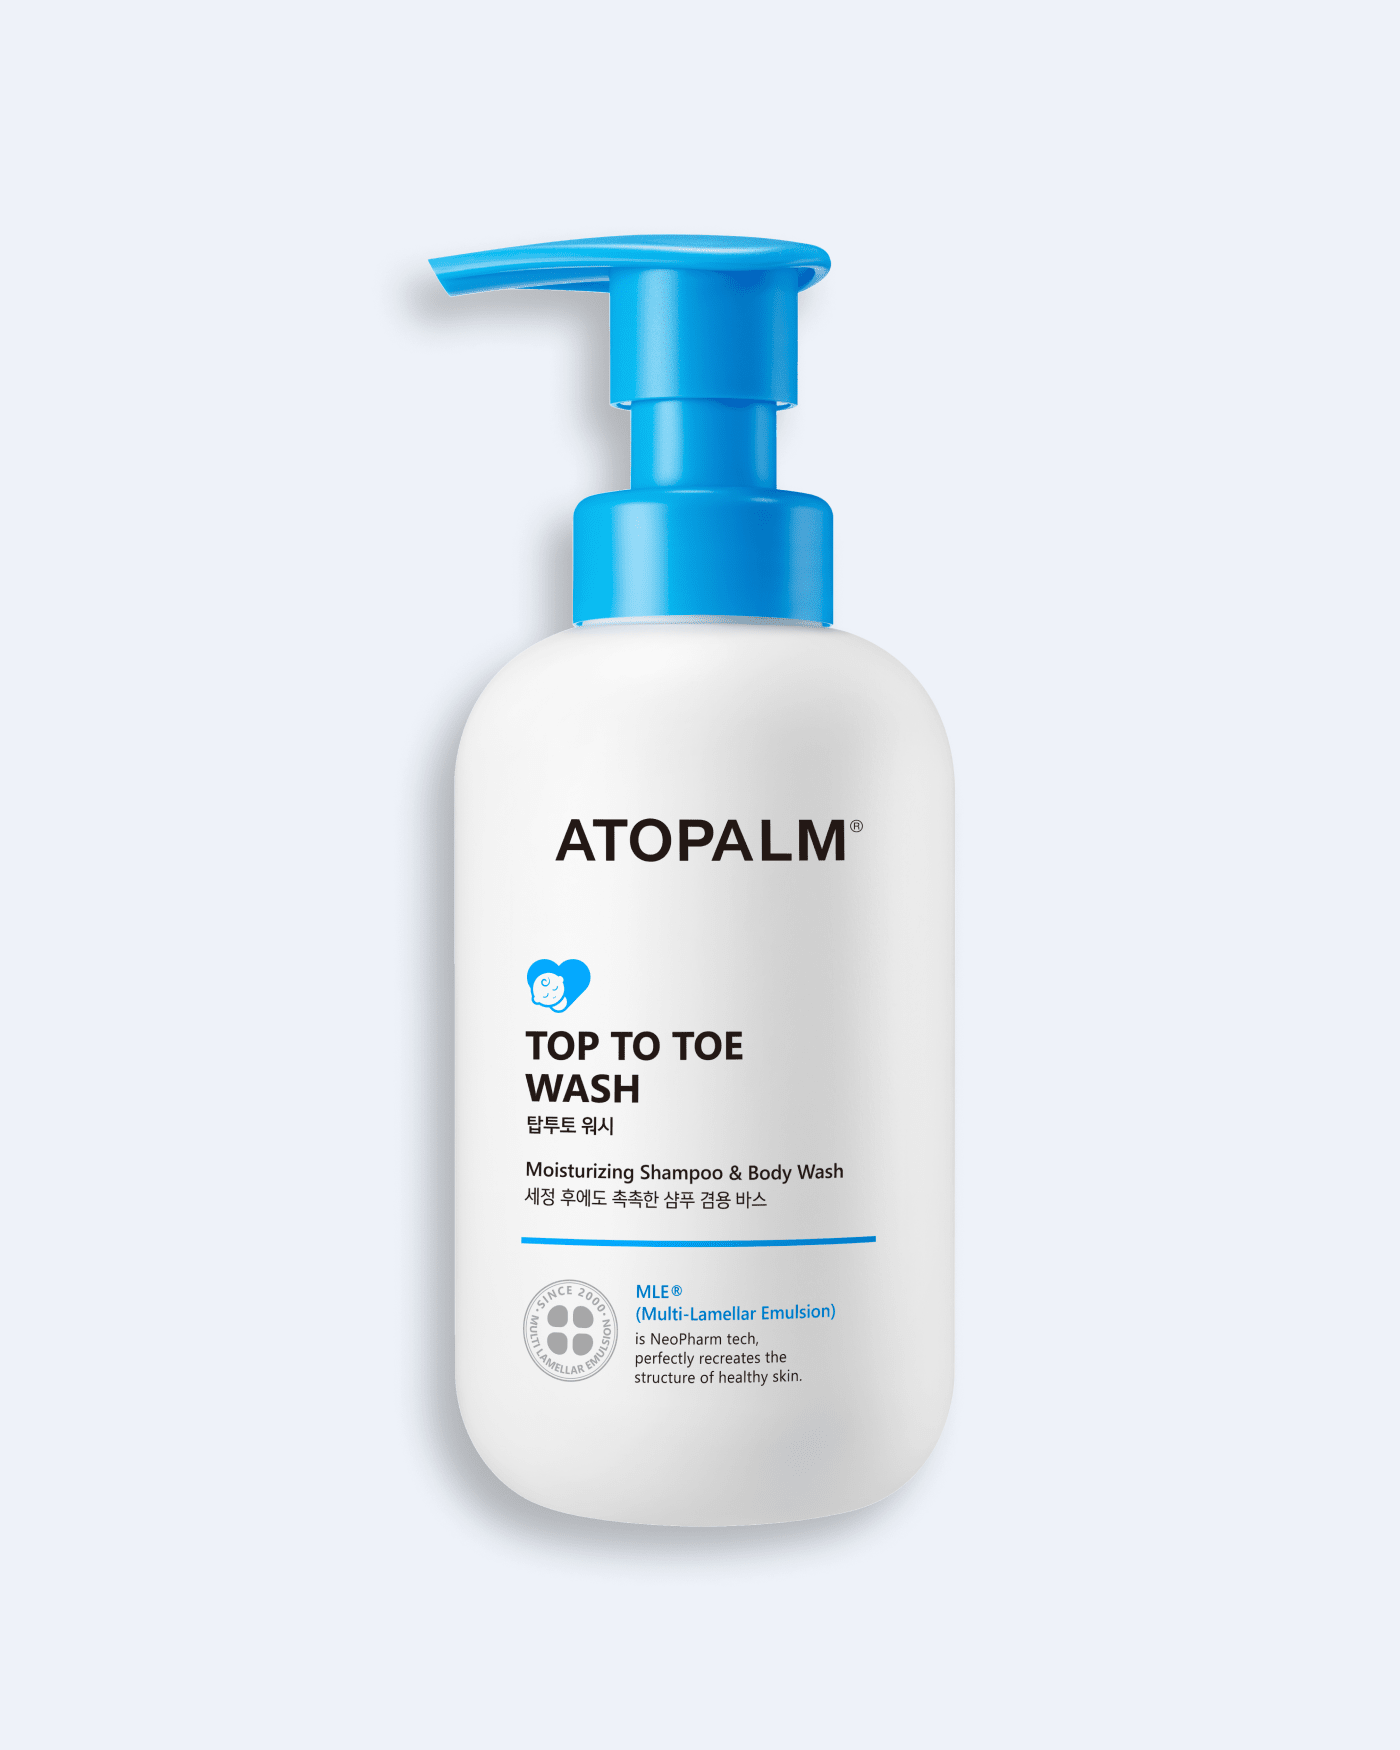 Top To Toe Wash Atopalm 